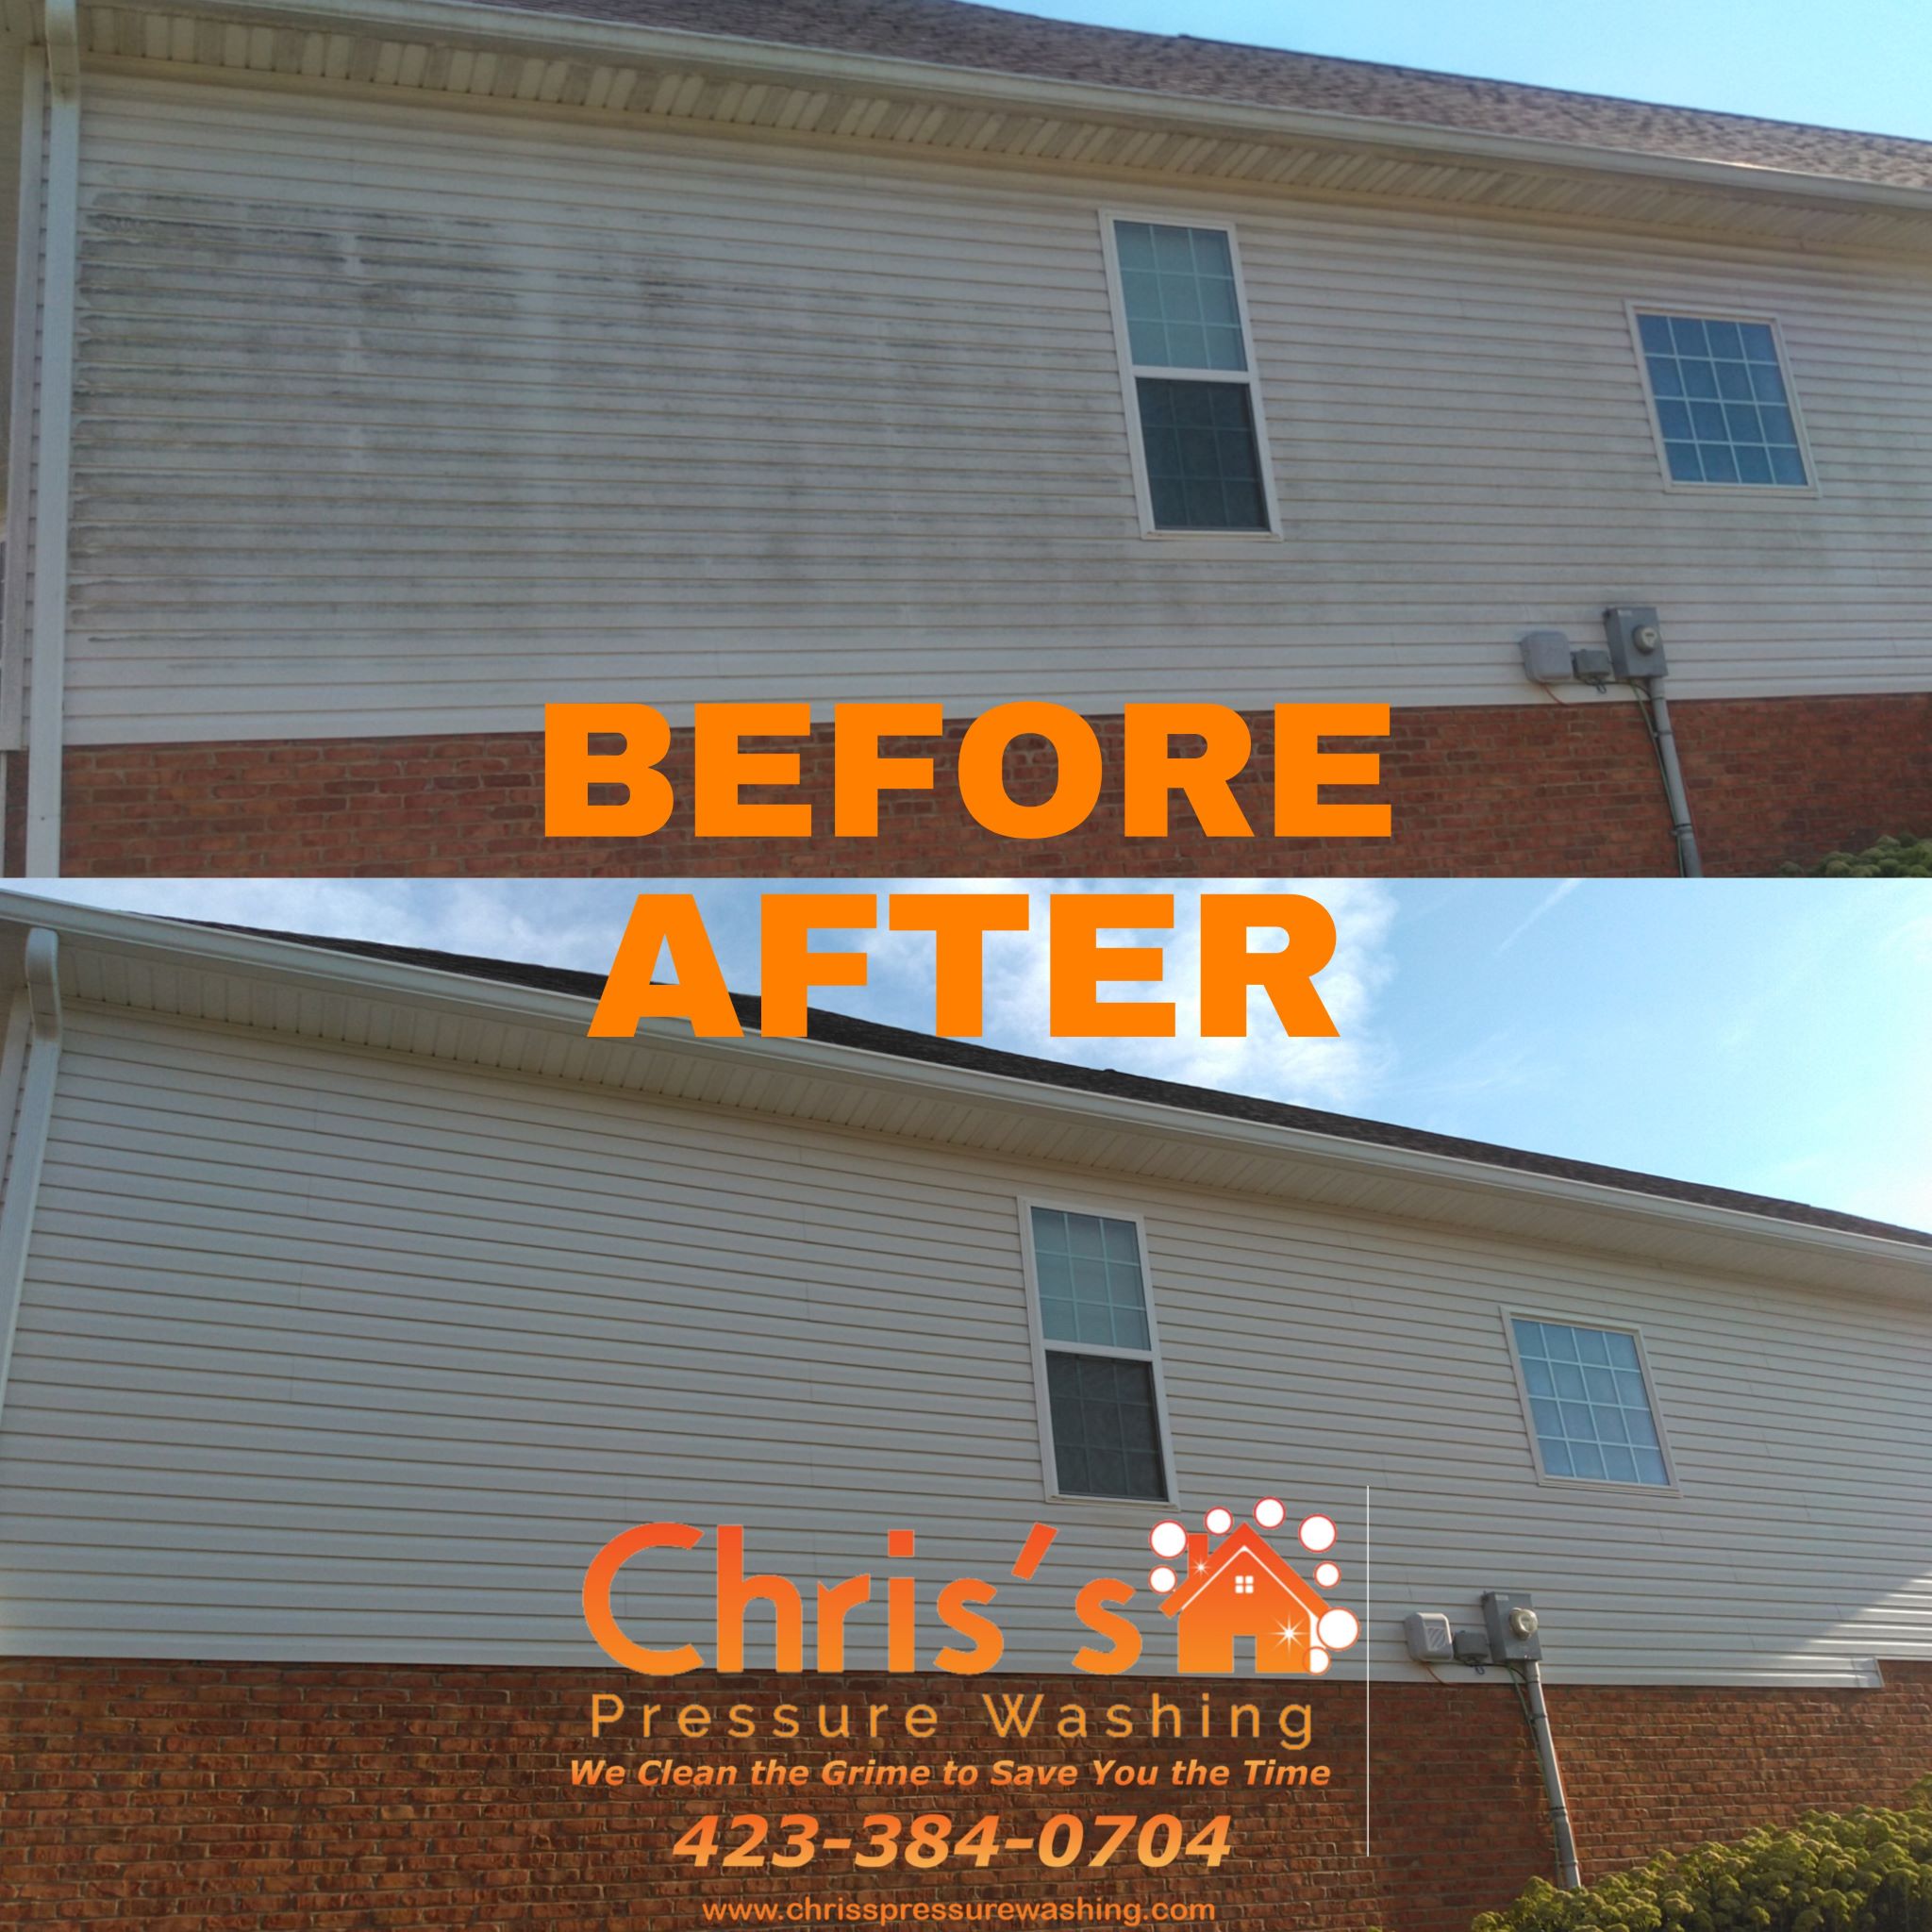 Why You Need Chris’s Pressure Washing for Graffiti Removal